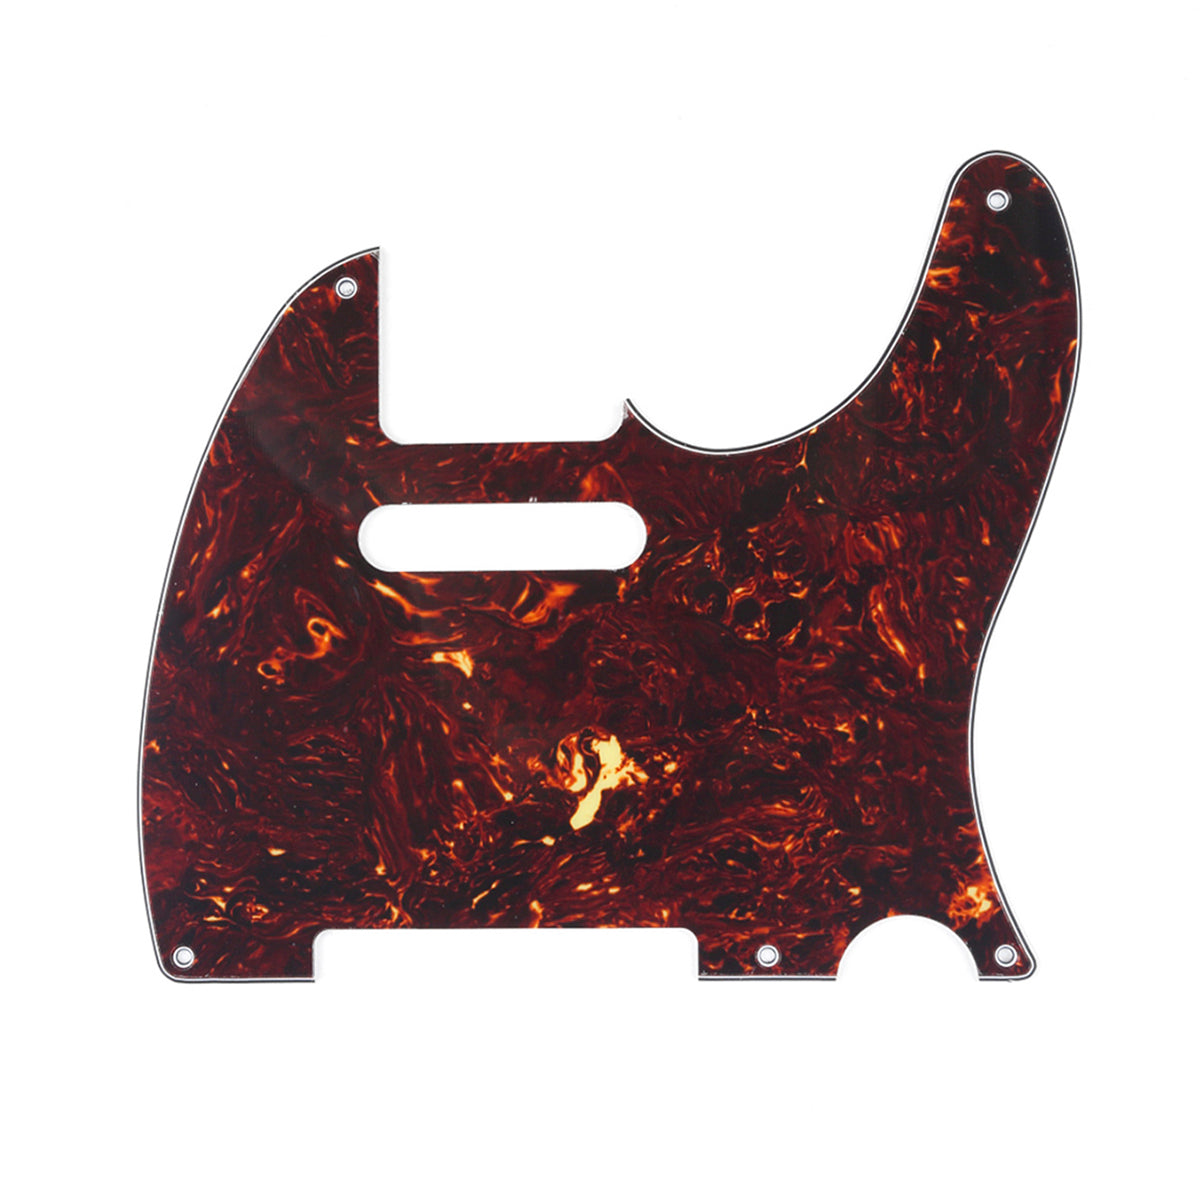 Musiclily 5 Hole Vintage Tele Pickguard for Fender American/Mexican Made Standard Telecaster Style Electric Guitar, 4Ply Tortoise Shell